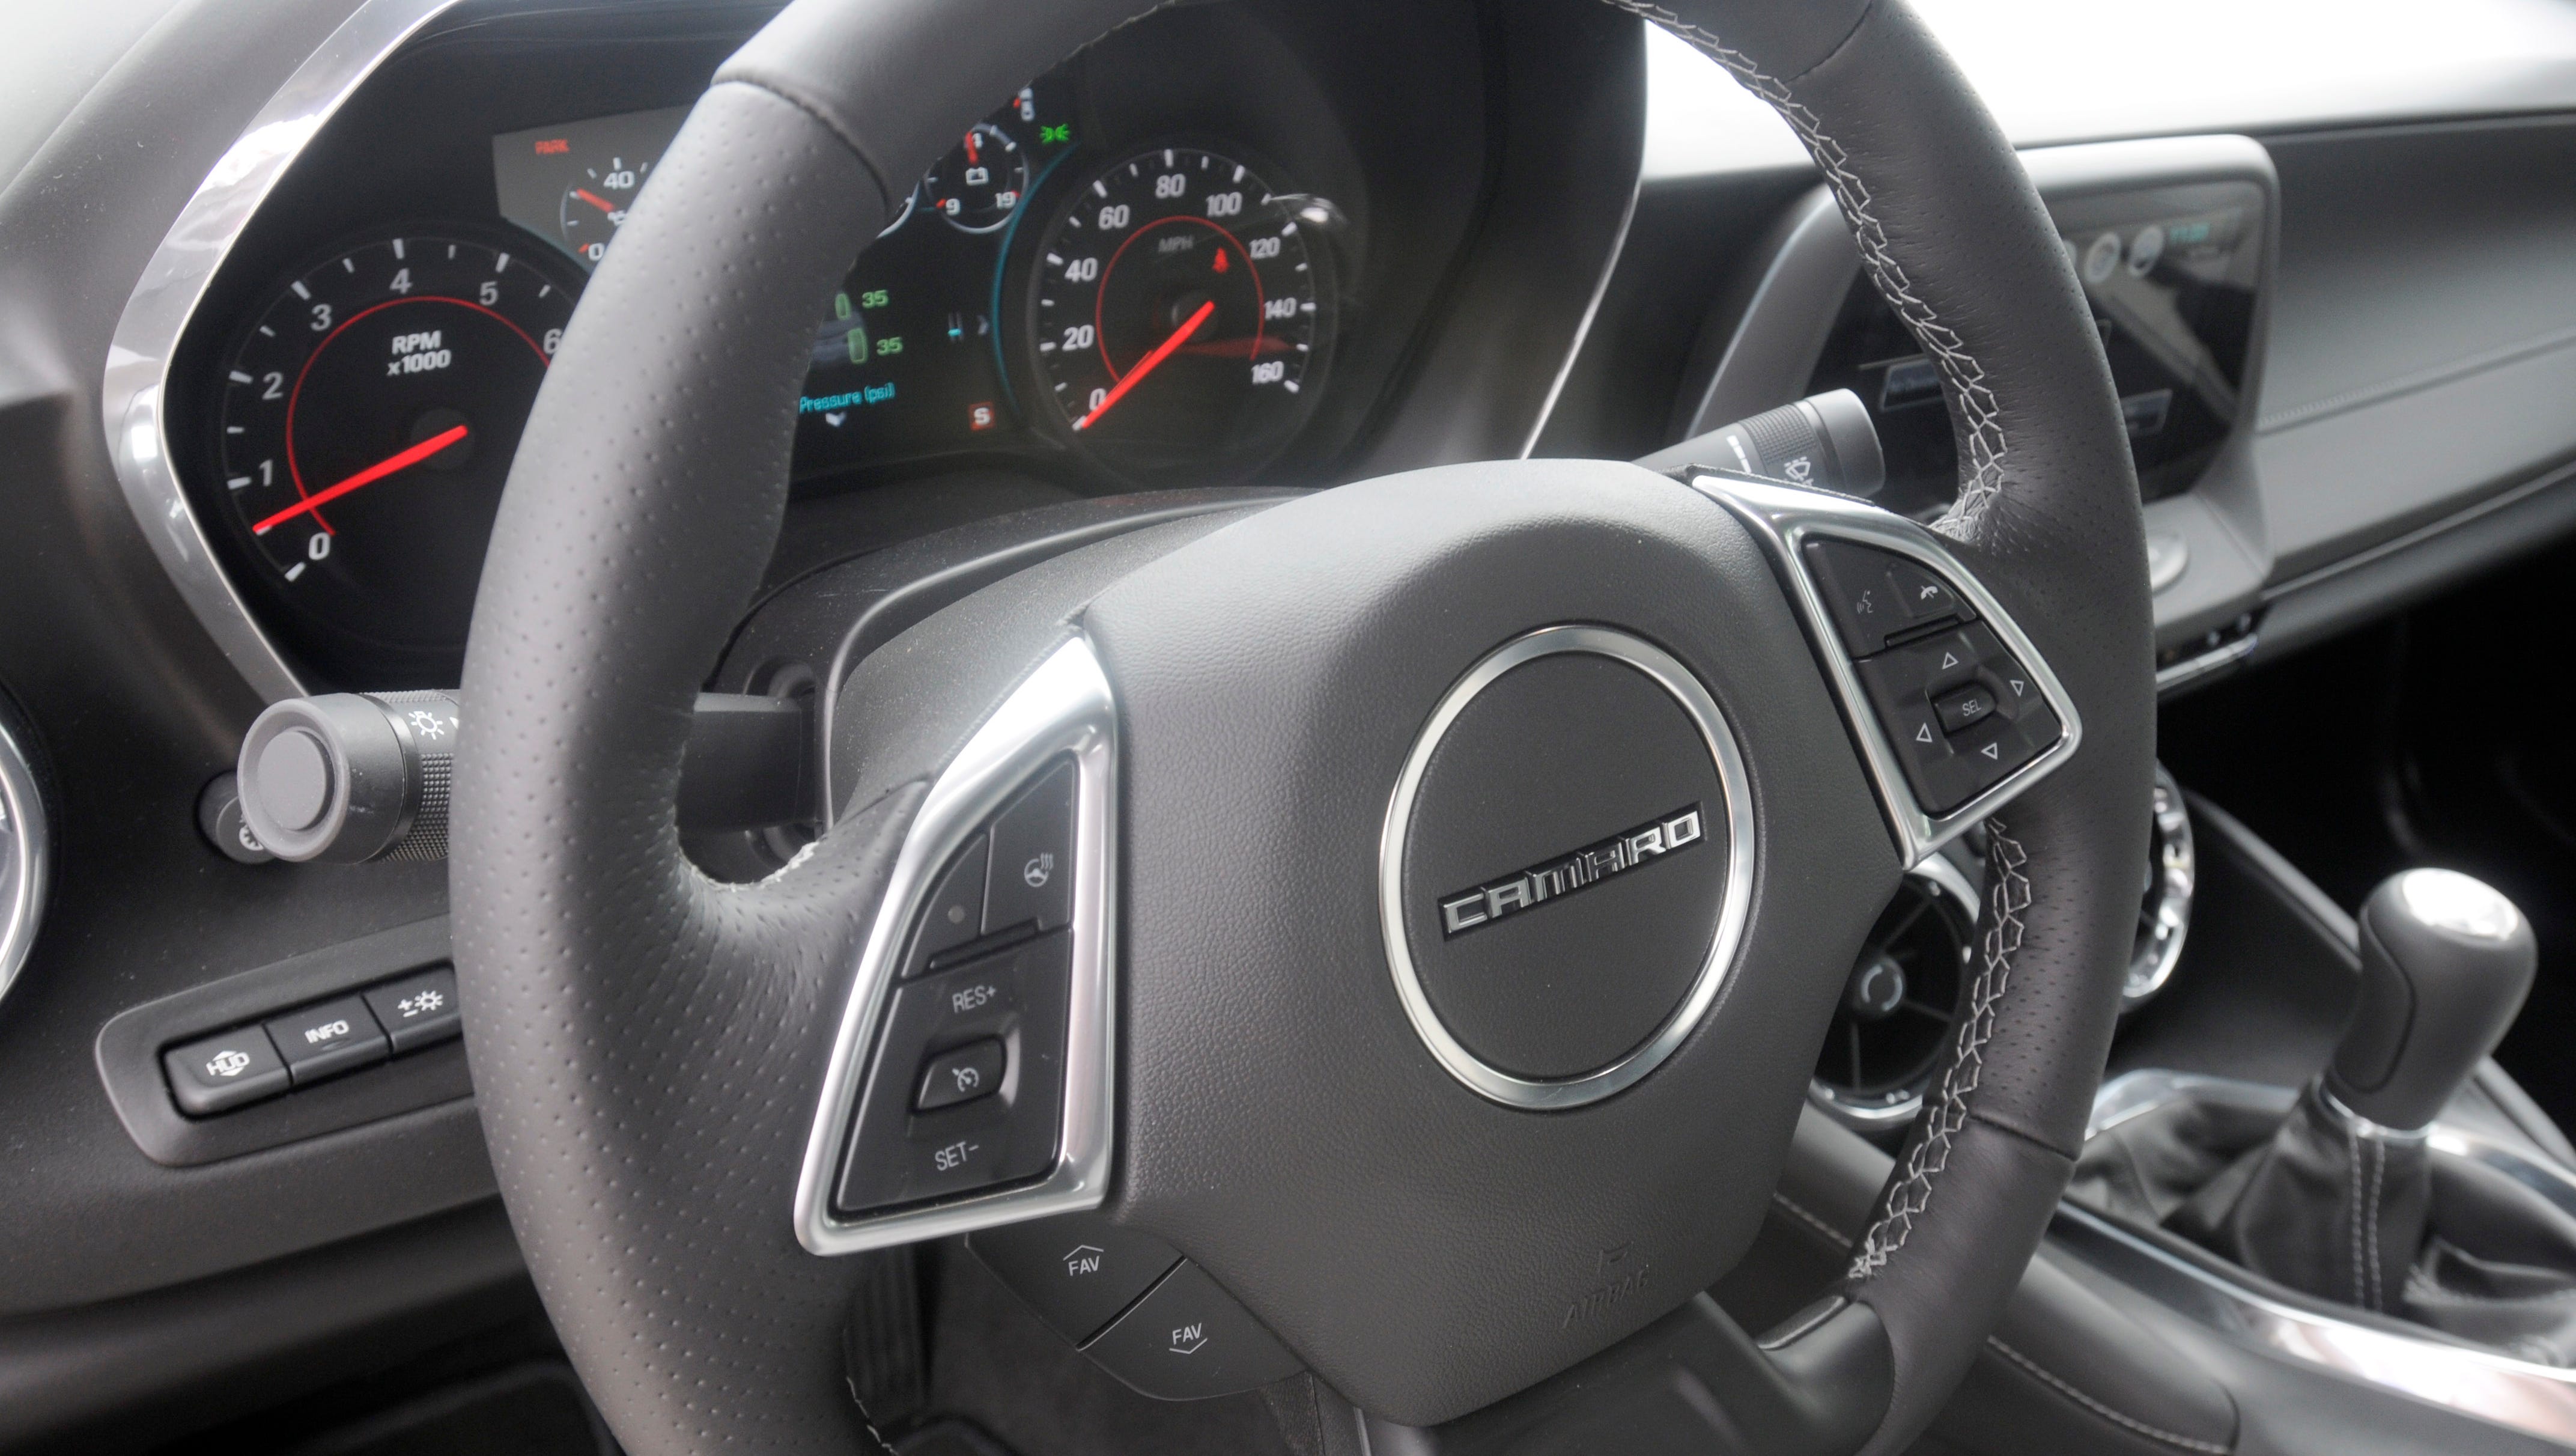 The dash and steering wheel are seen during a test day with the new Chevrolet Camaro.